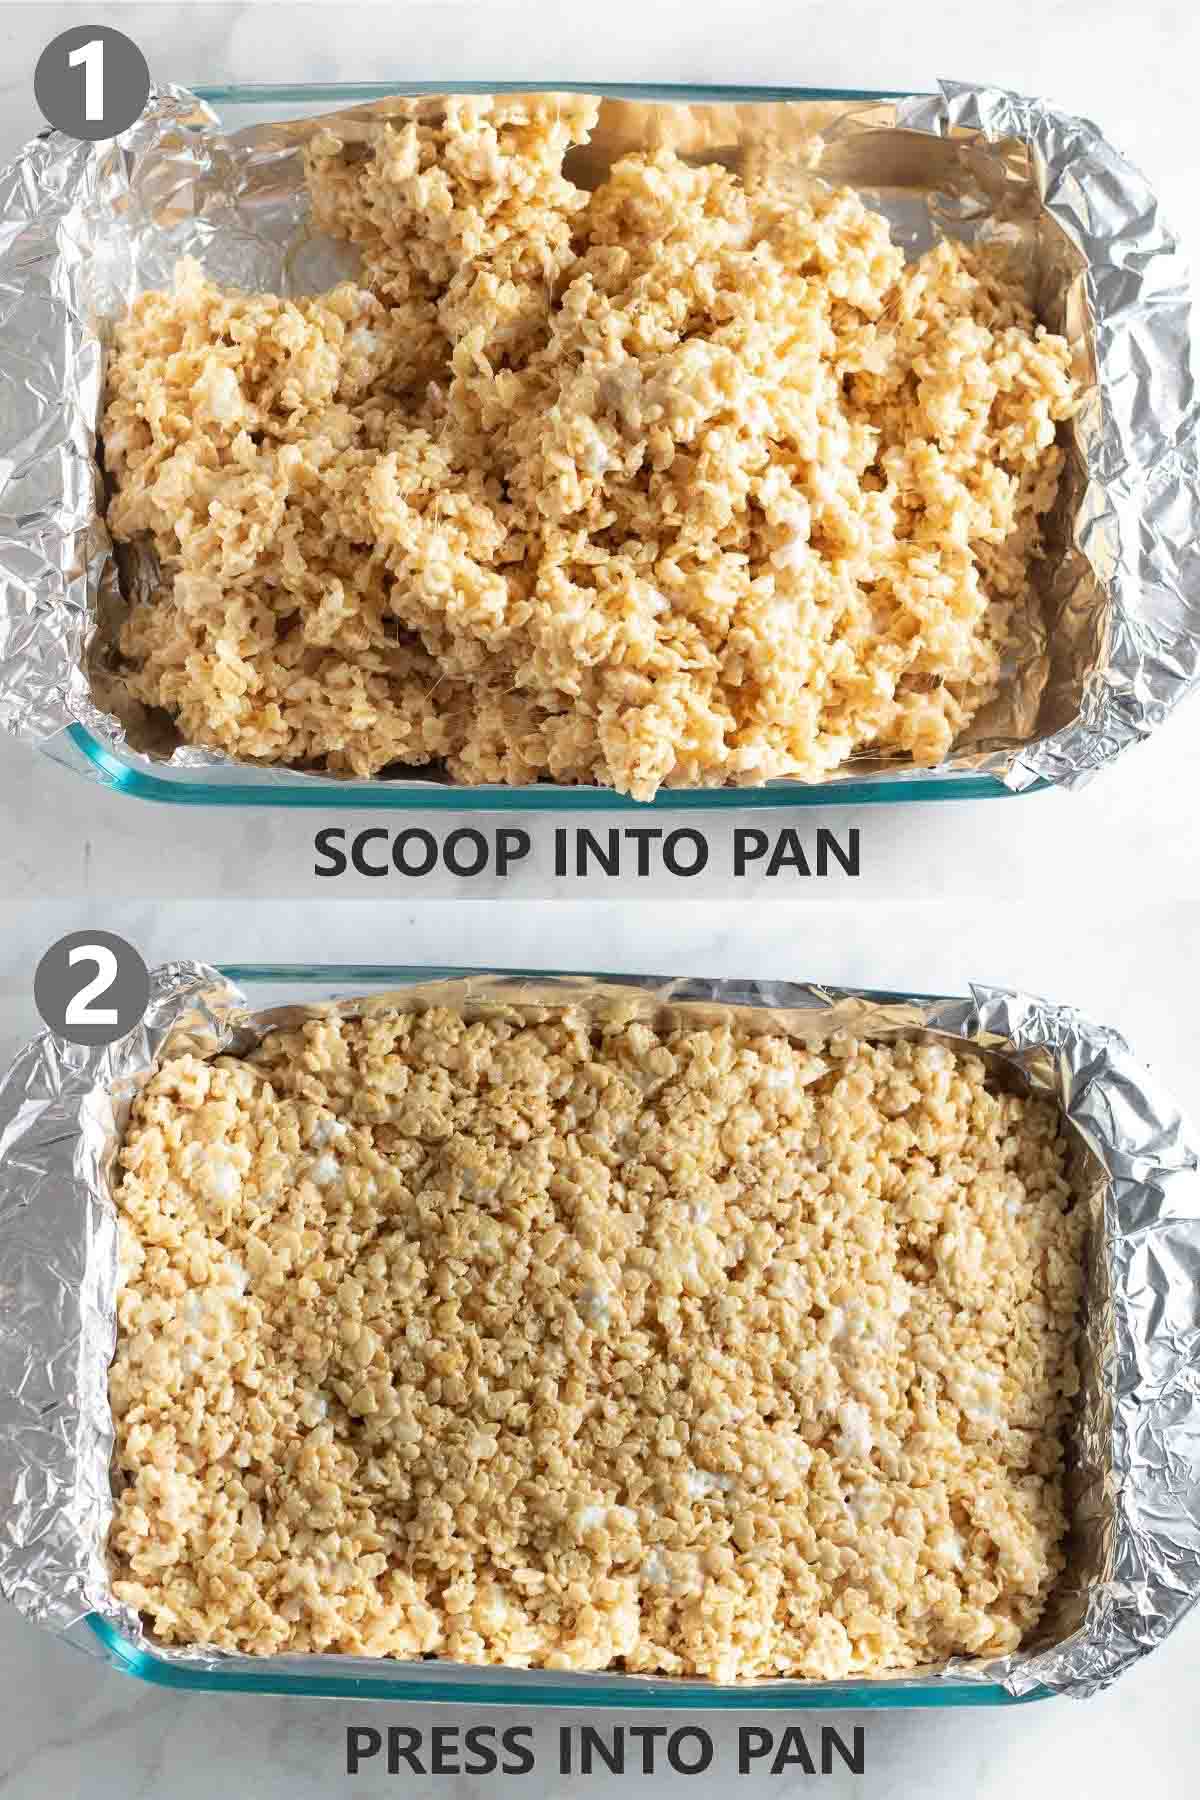 2 steps involved in making crispy rice cereal treats - scooping mixture into a foil lined pan and pressing it into the pan